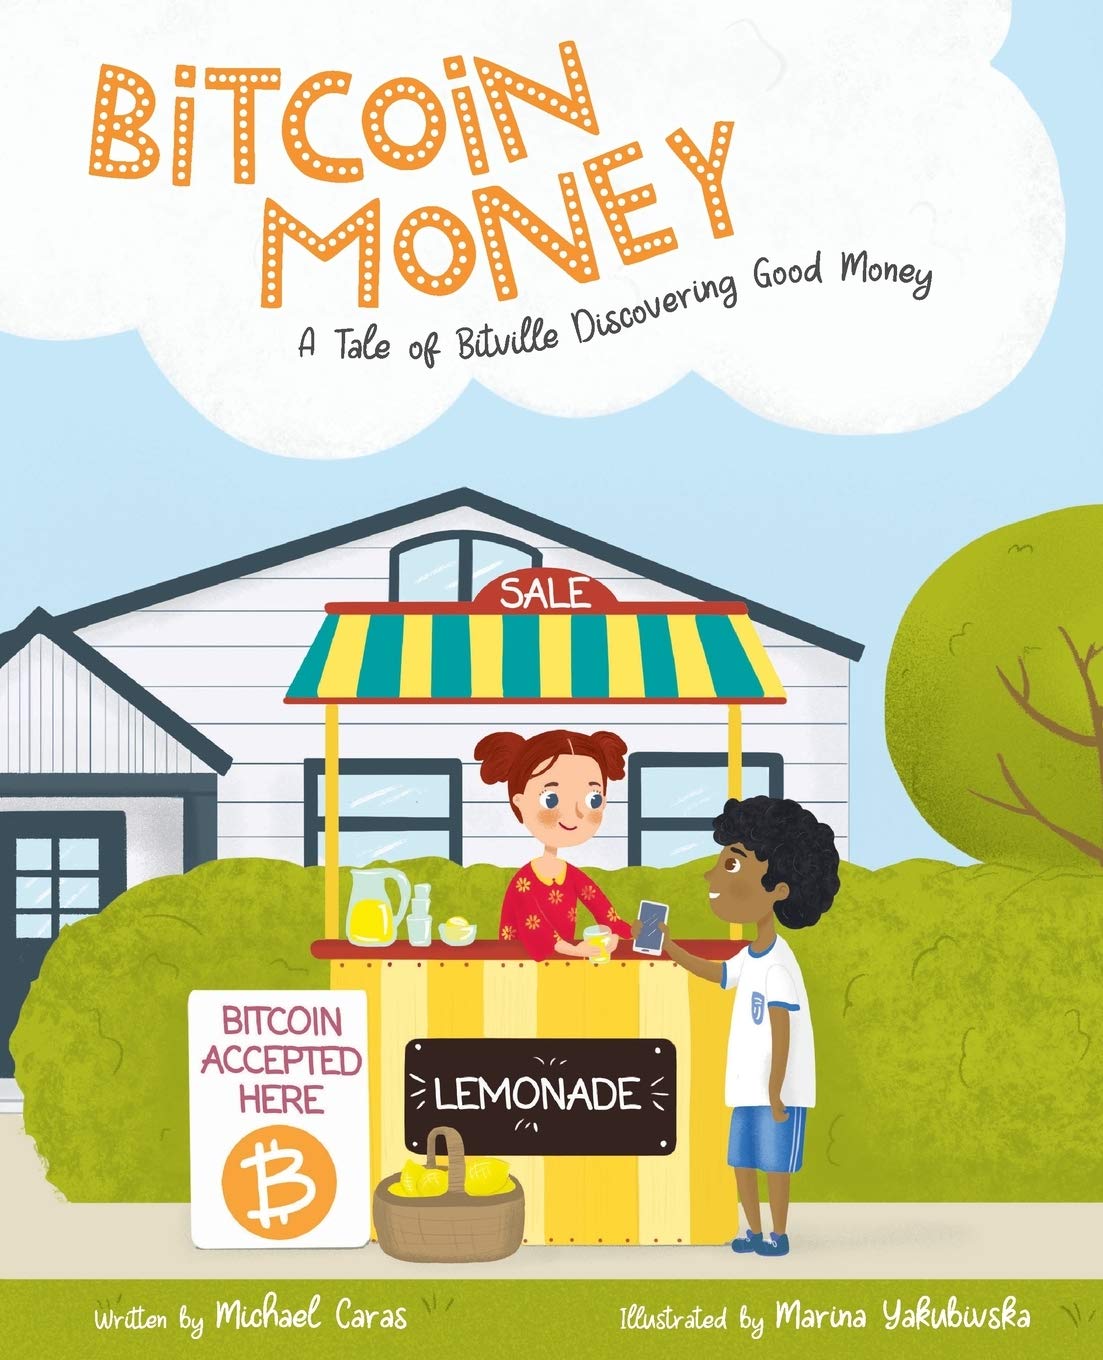 Inspired Fashion Finds-Bitcoin Money explained children's book